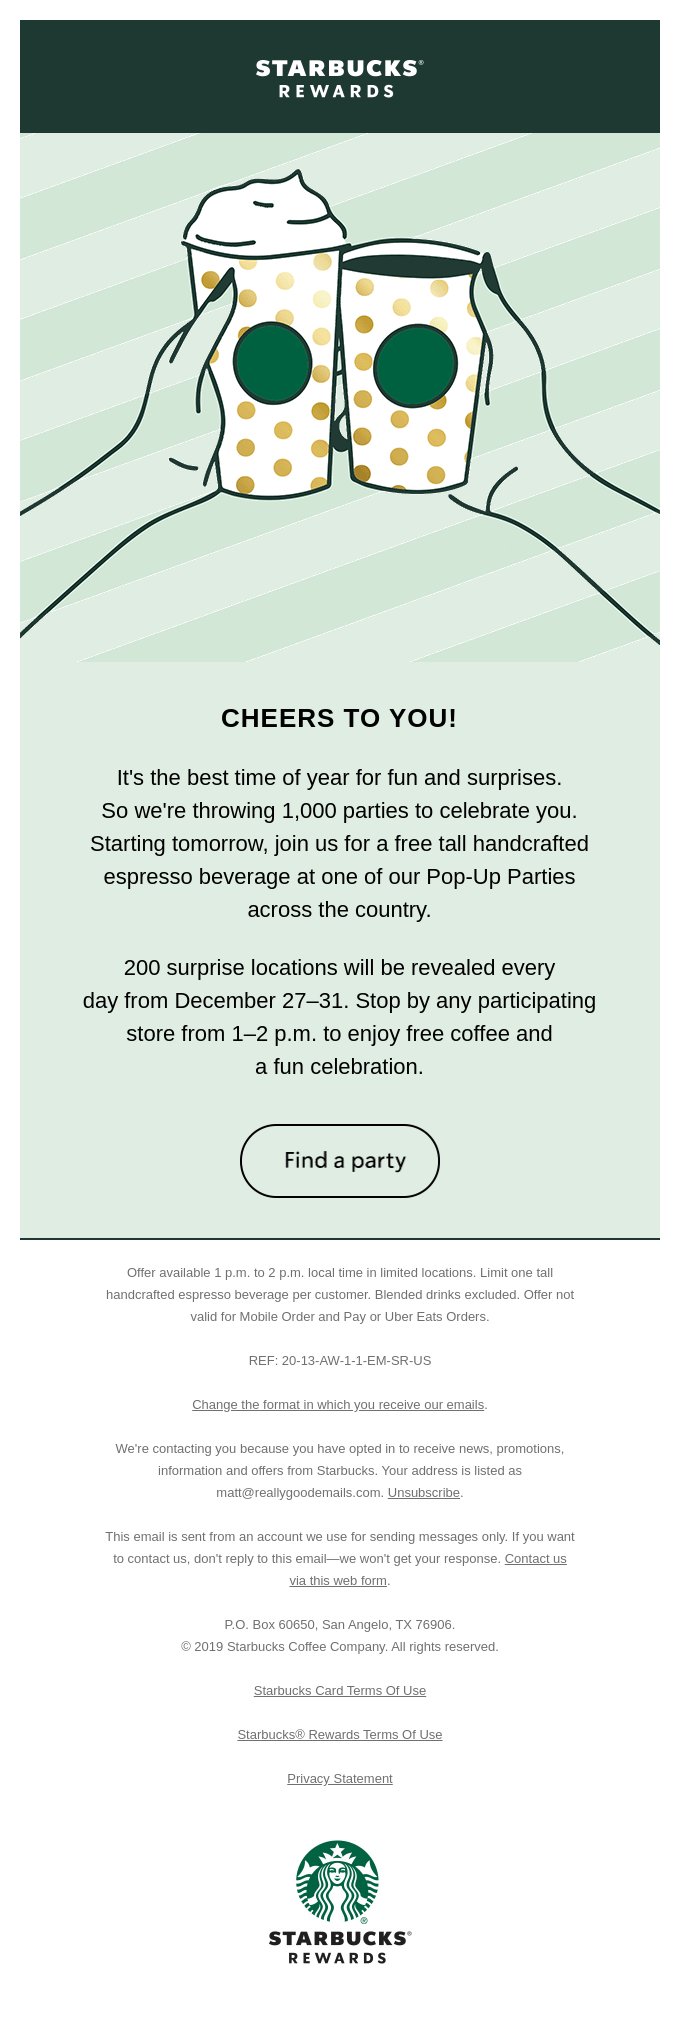 5 days. 1,000 parties. Lots of free es - Starbucks Email Newsletter